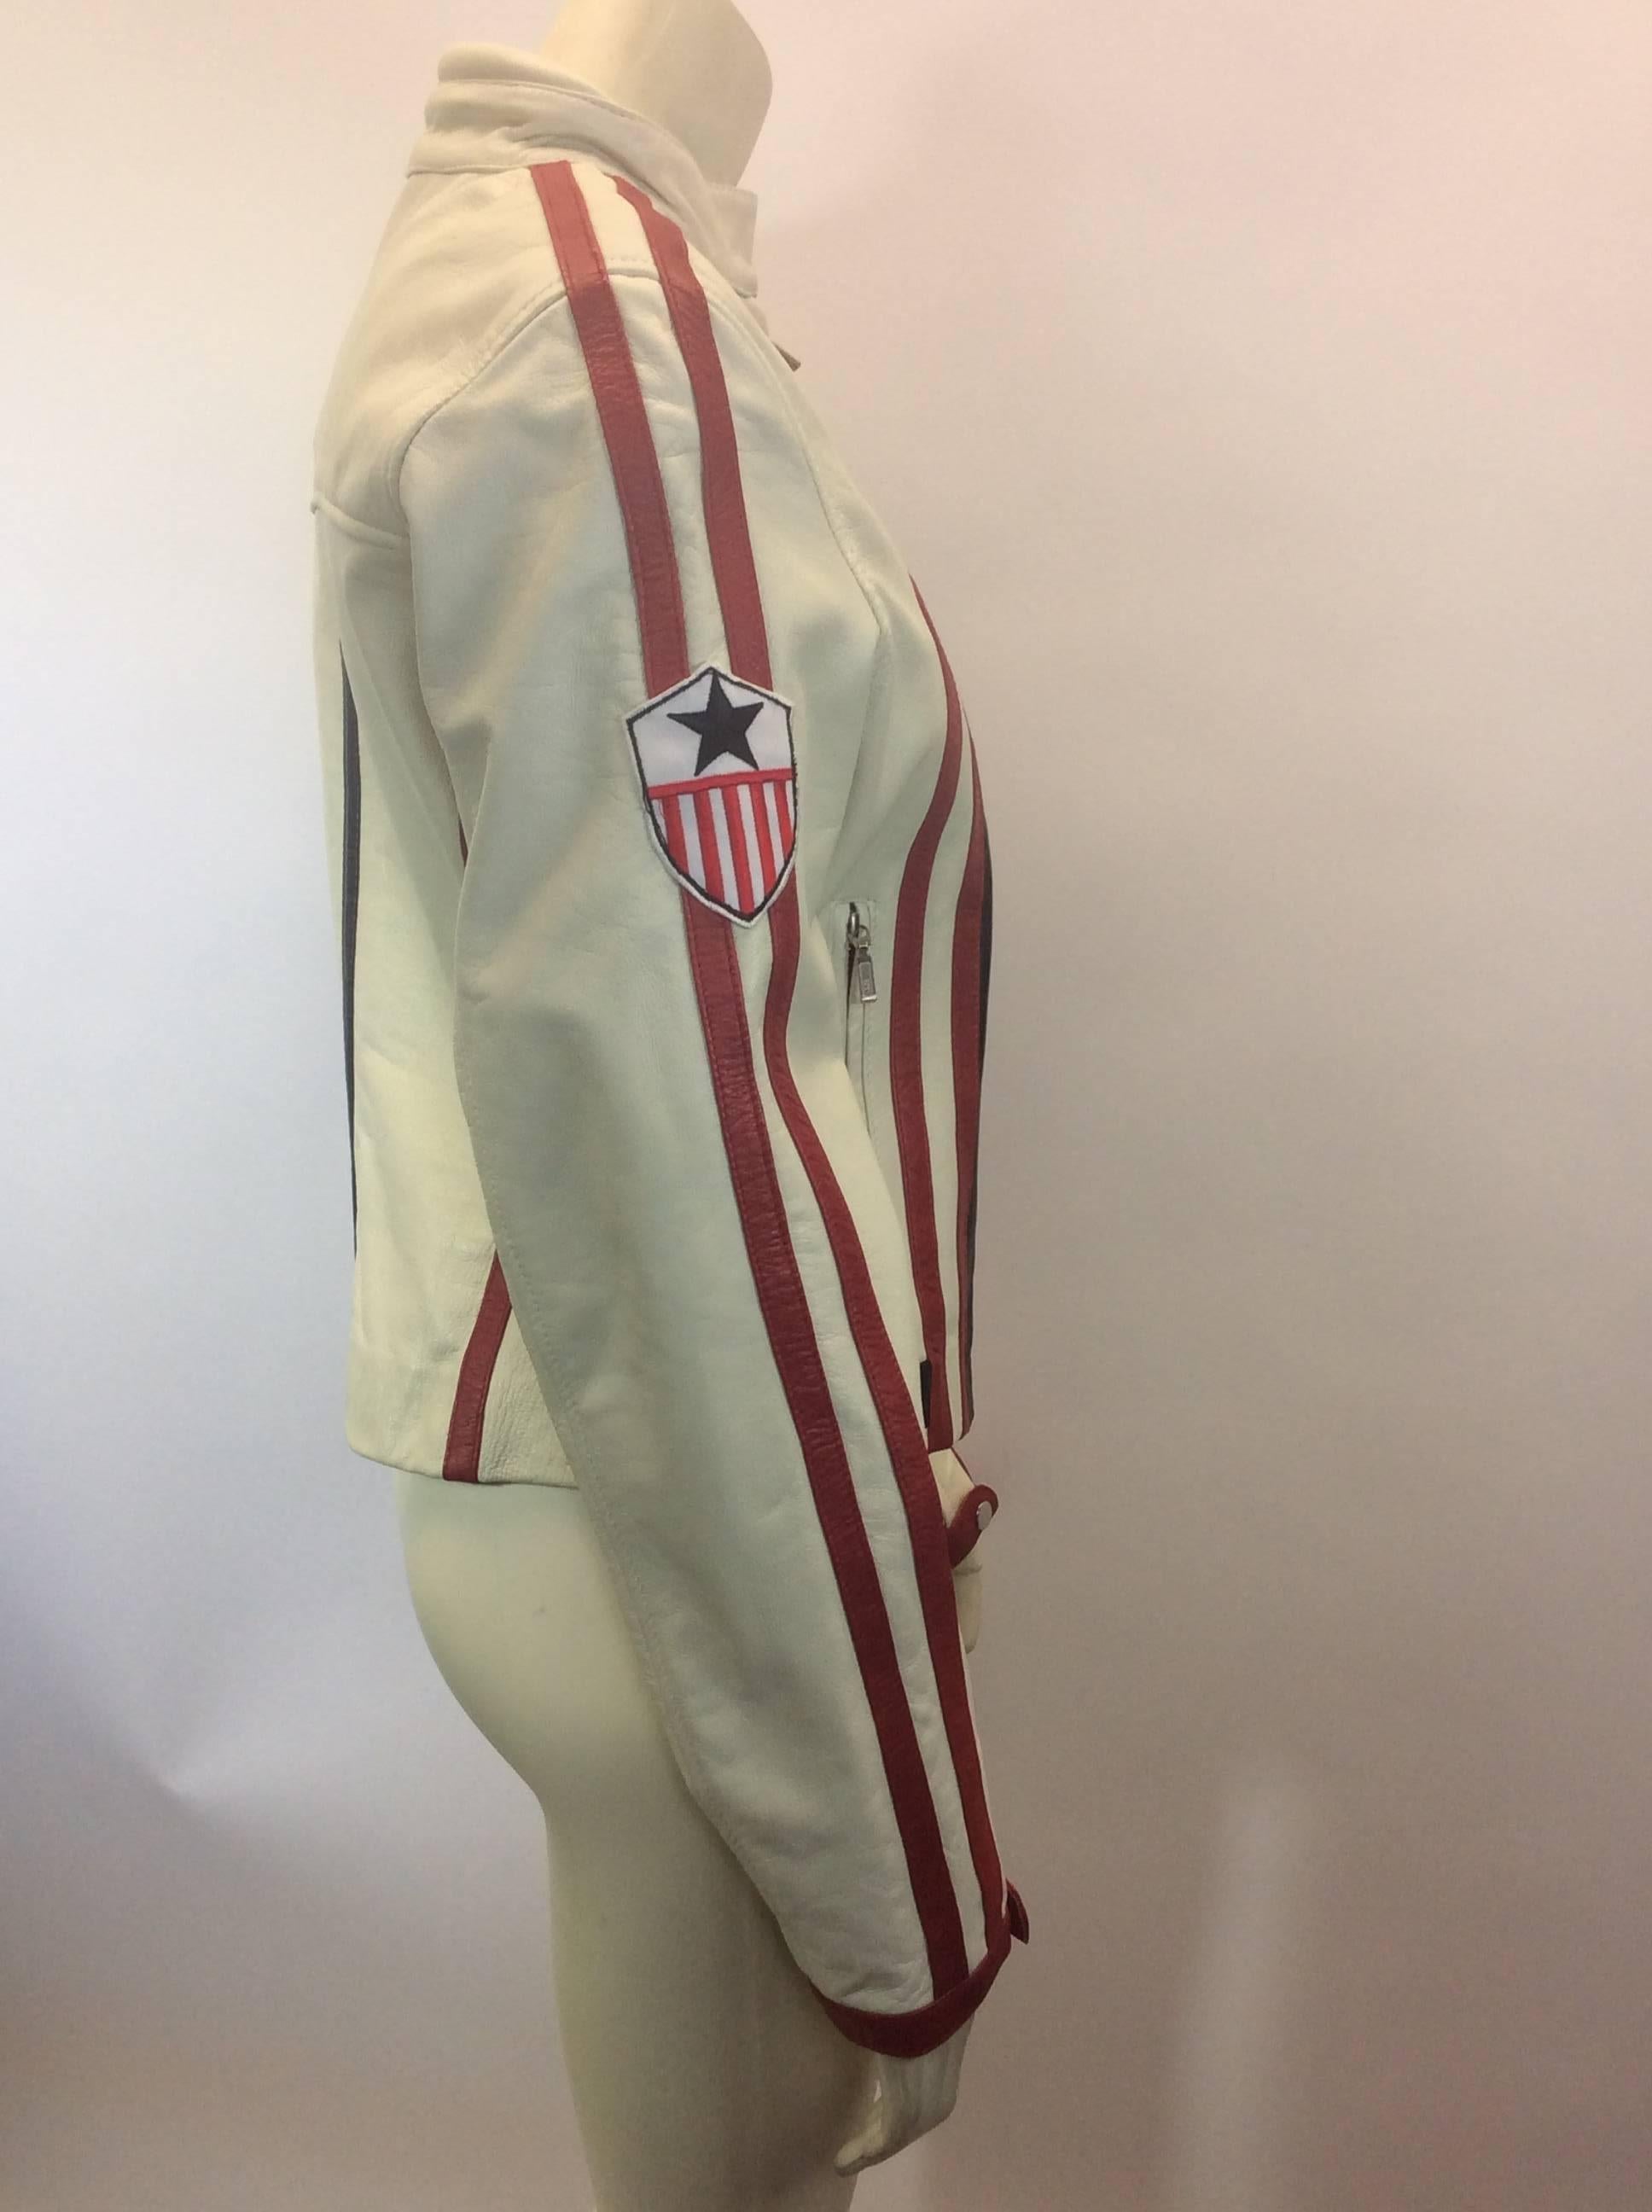 Feminin Touch White and Red Leather Moto Jacket In Excellent Condition For Sale In Narberth, PA